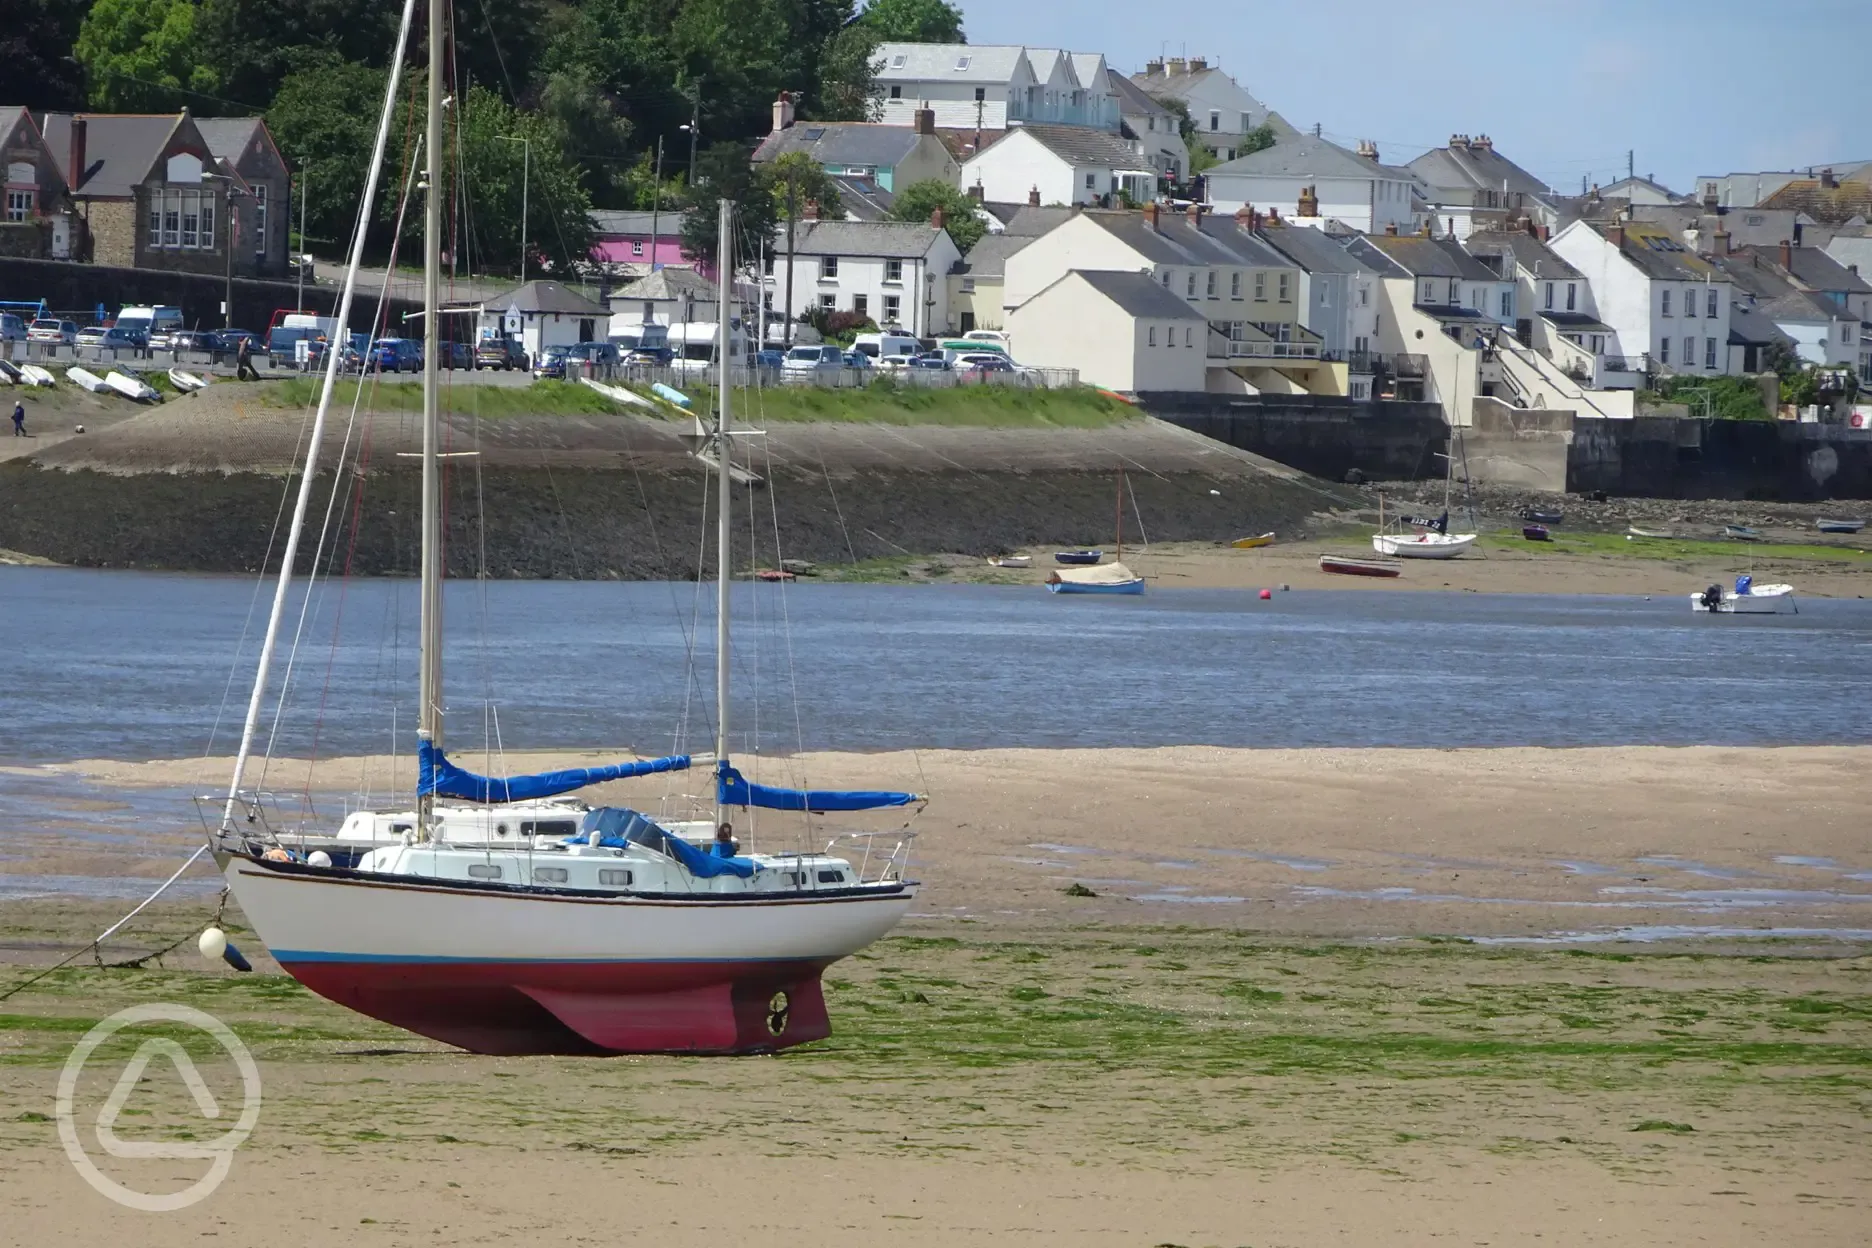 Instow a short walk from the campsite